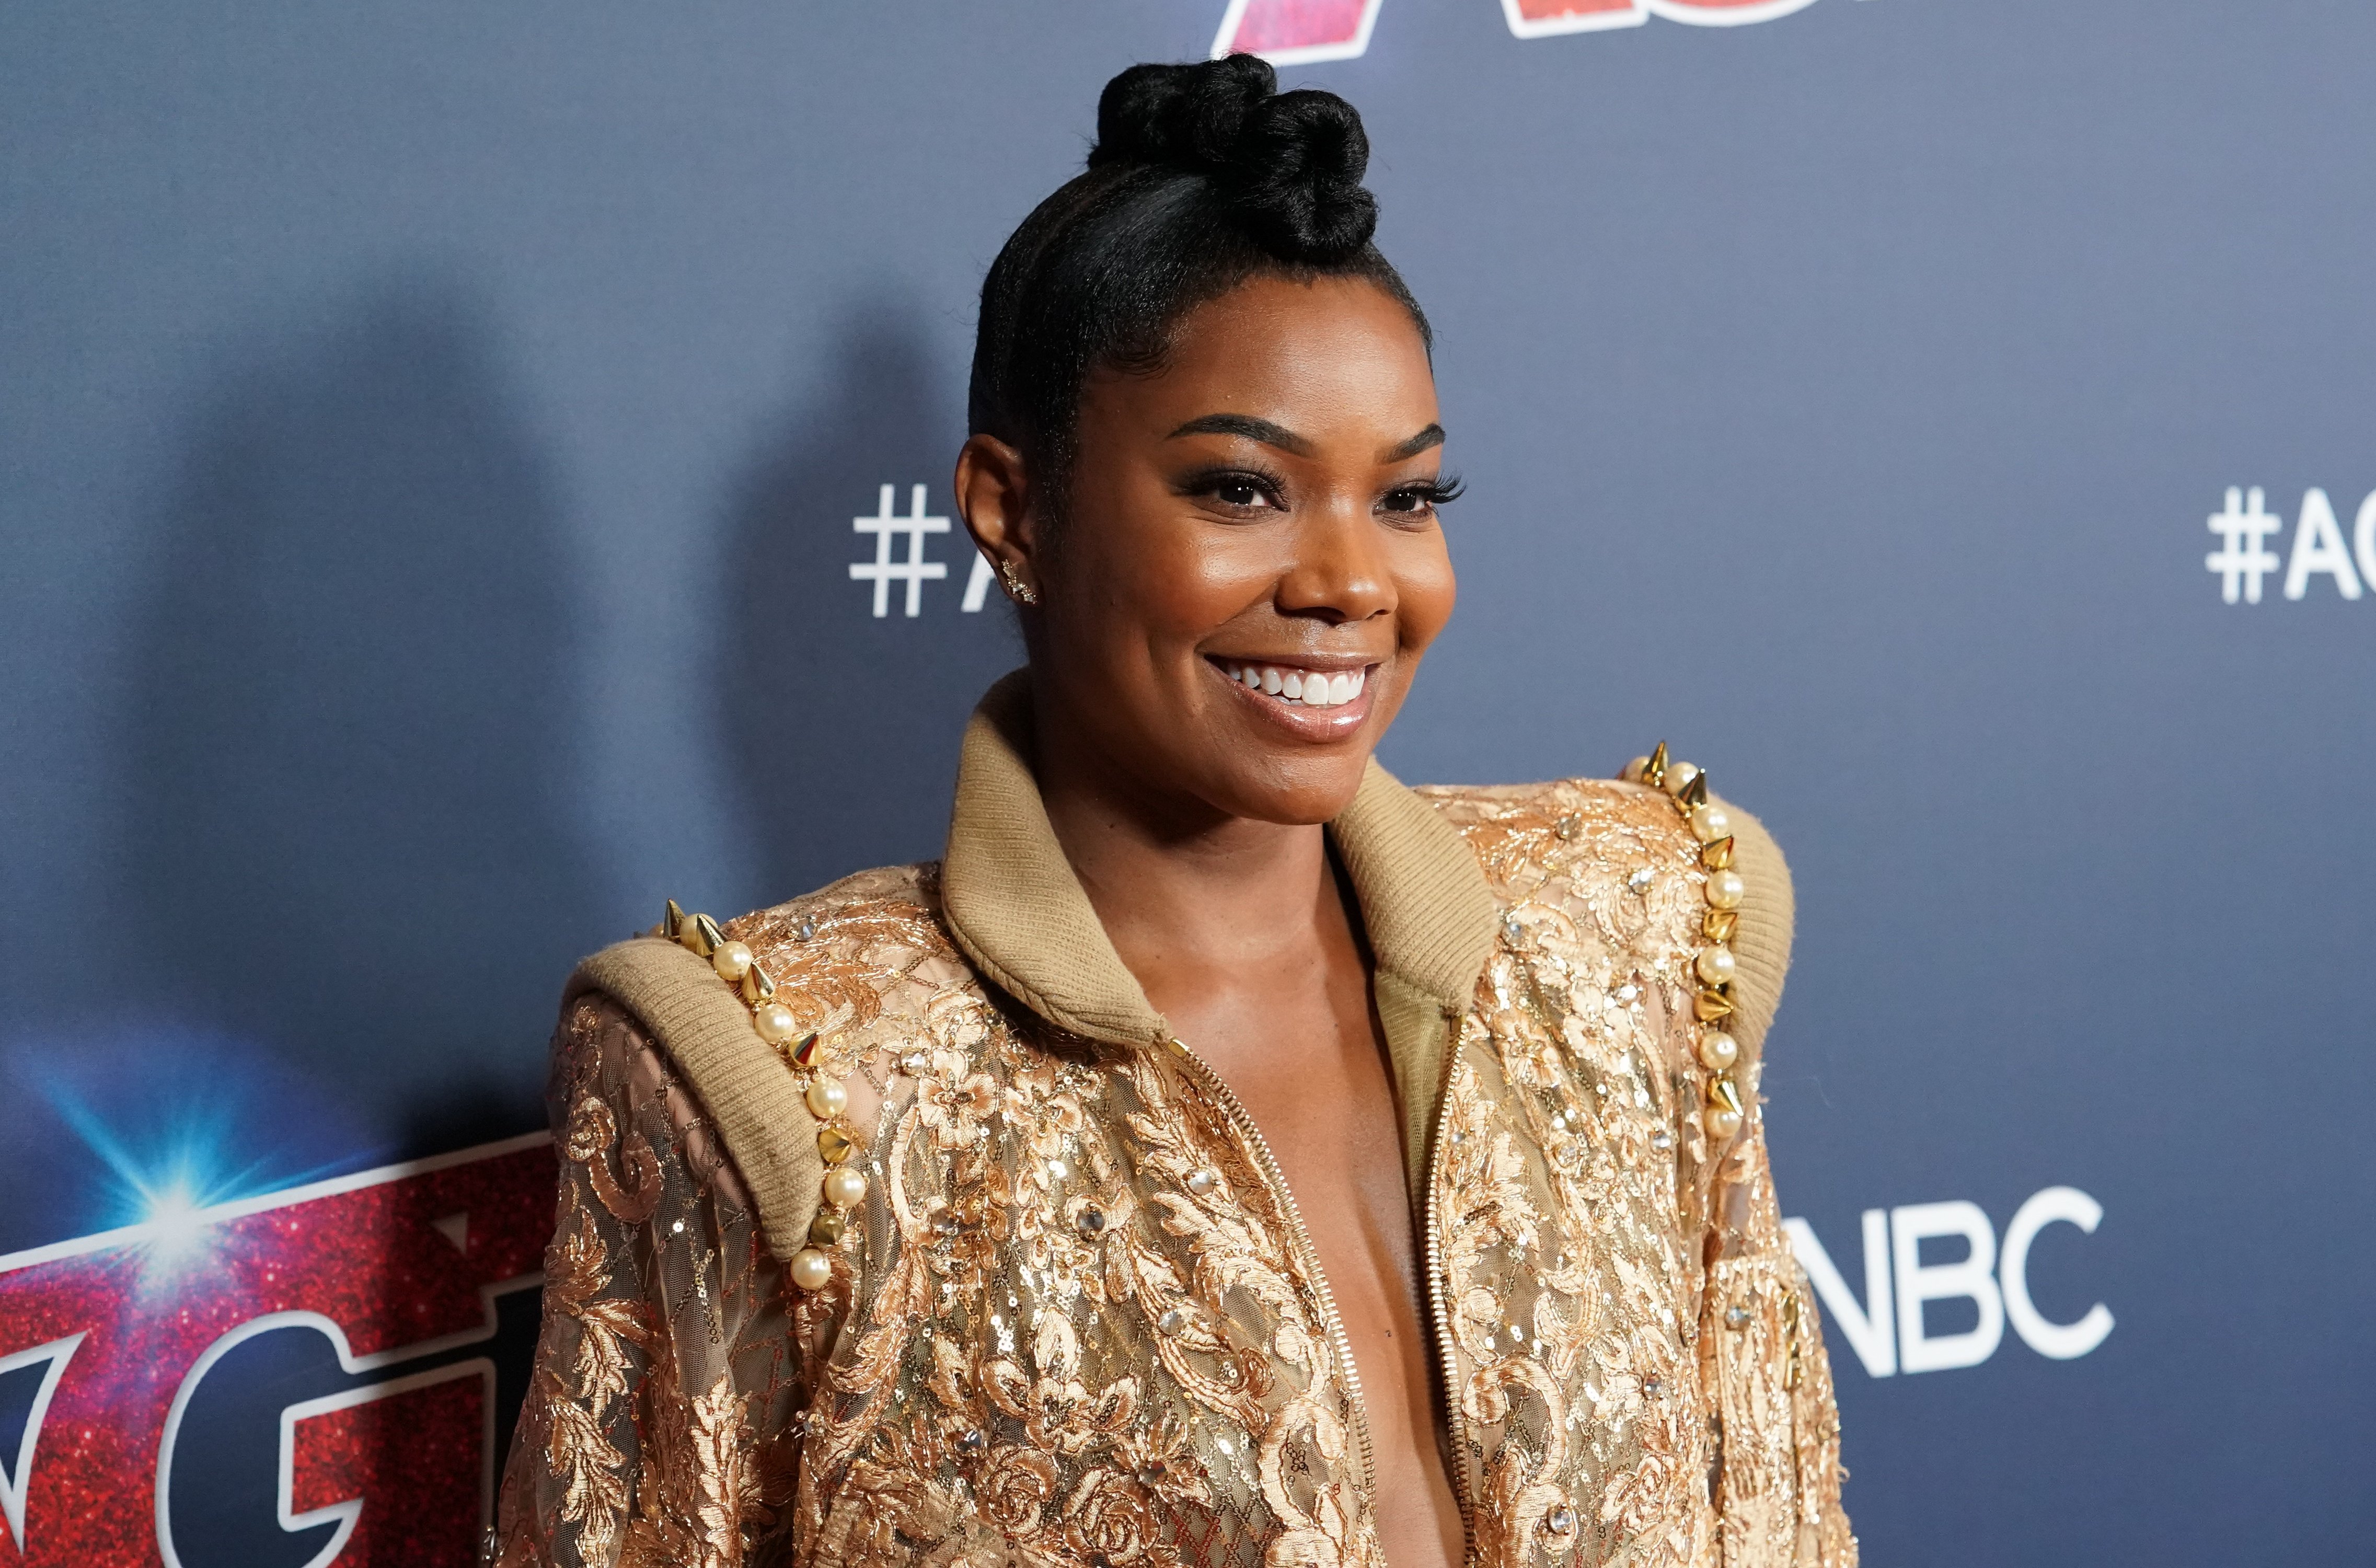 Gabrielle Union attends "America's Got Talent" Season 14 Live Show Red Carpet at Dolby Theatre on September 03, 2019, in Hollywood, California. | Source: Getty Images.